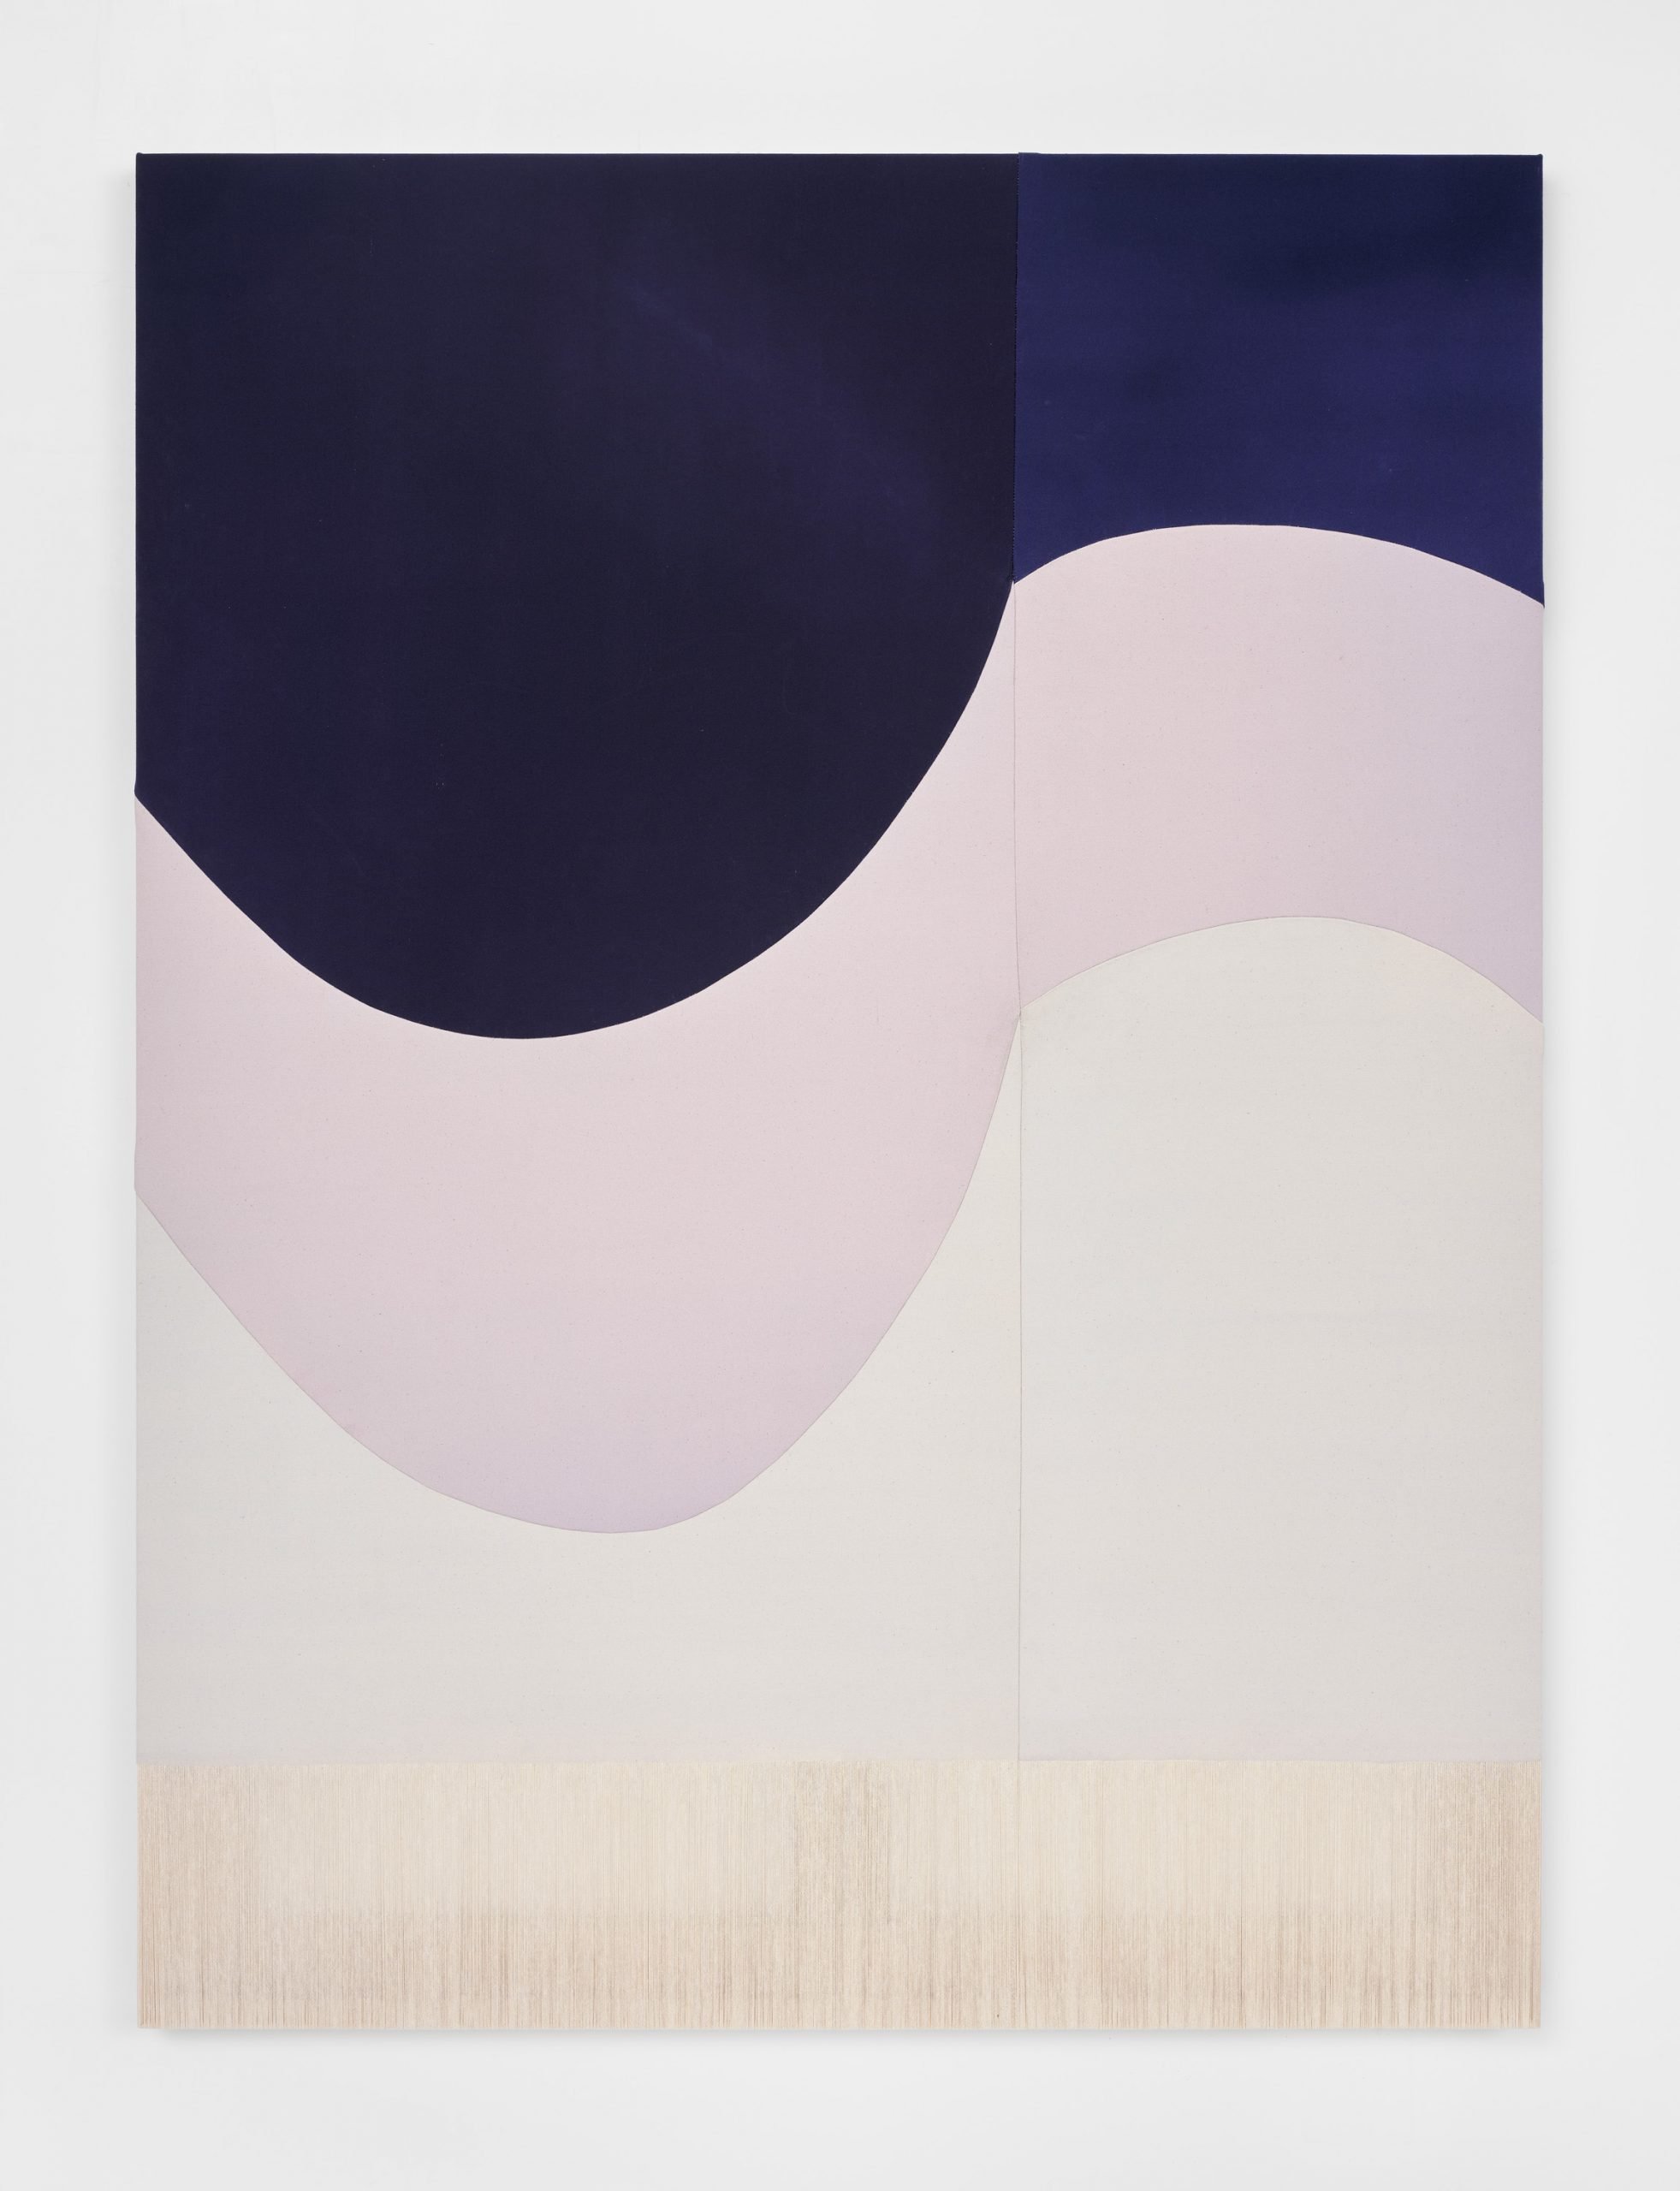 Rebecca Ward, waveform vi, 2022, acrylic and dye on stitched canvas, 60 x 80 in